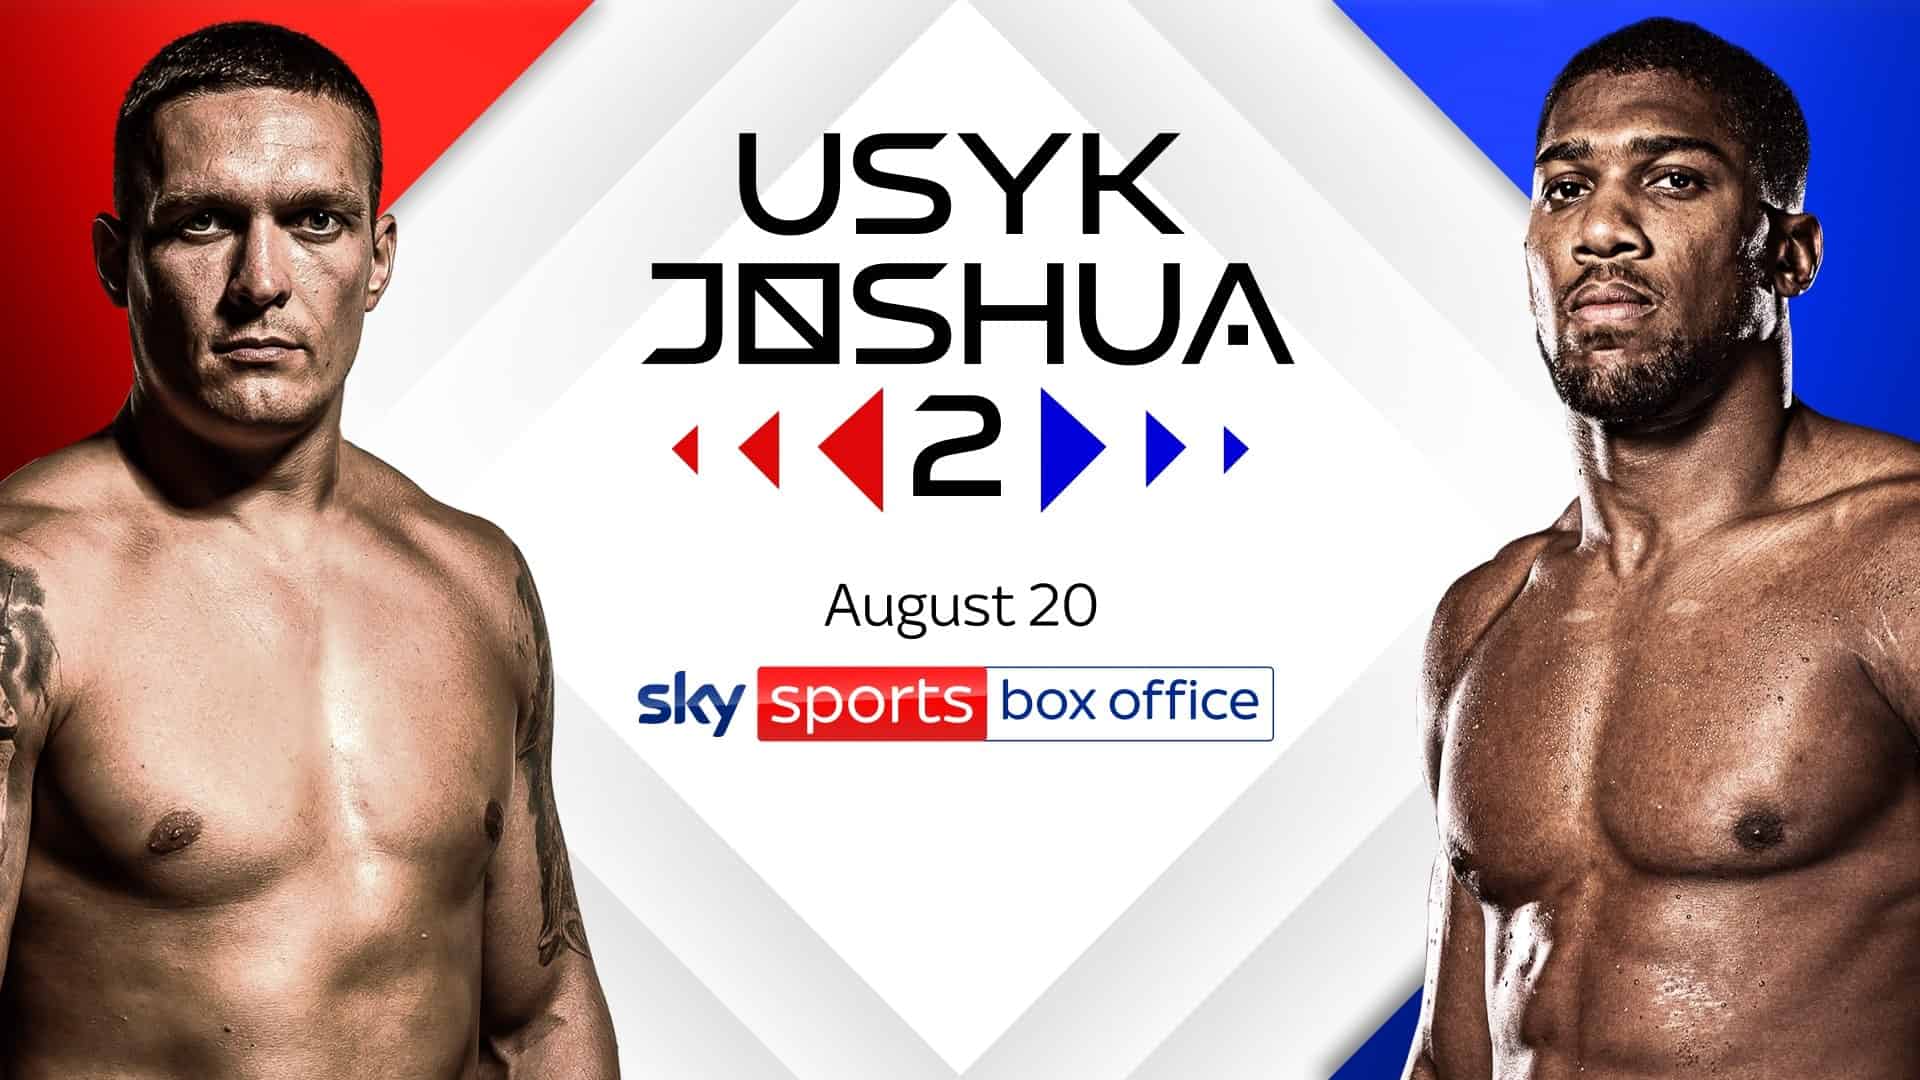 Usyk vs Joshua 2 US TV coverage unknown with eight days to go